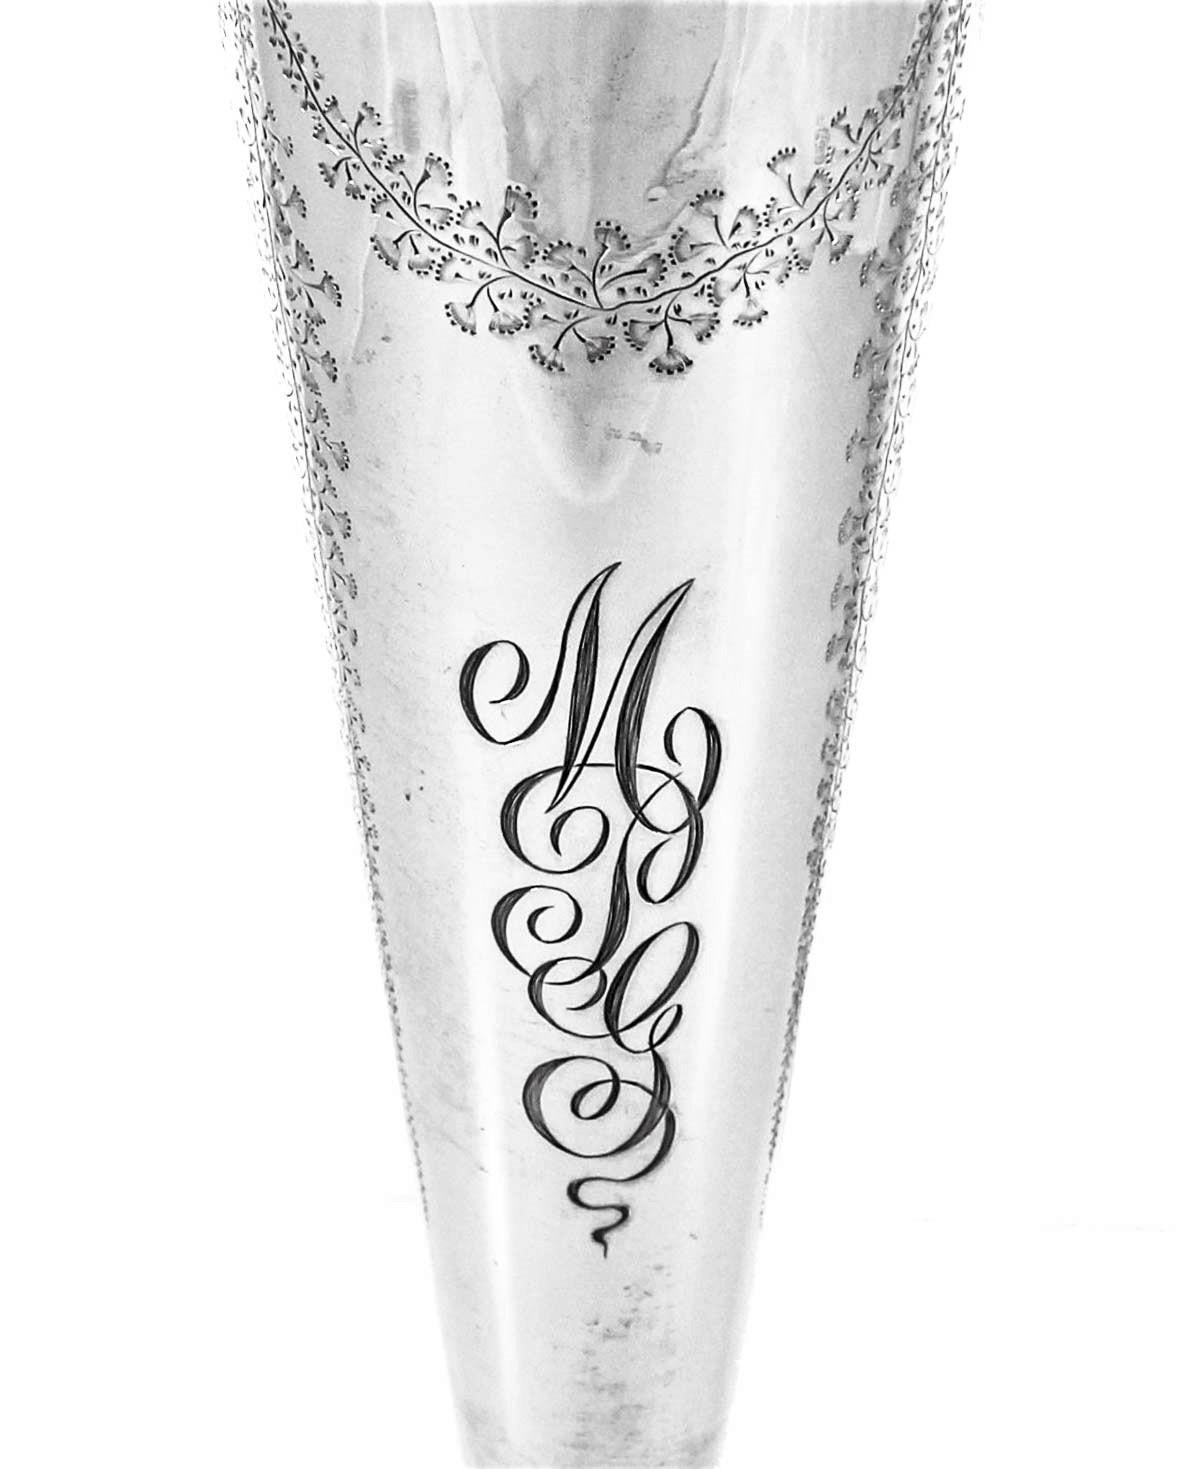 Bows, wreaths and flowers give this sterling silver vase a delicate, feminine feel. It’s wider on top and tapers in at the bottom; this allows the flowers to fill out nicely. Around the base etchings similar to those found on top. A beautiful hand